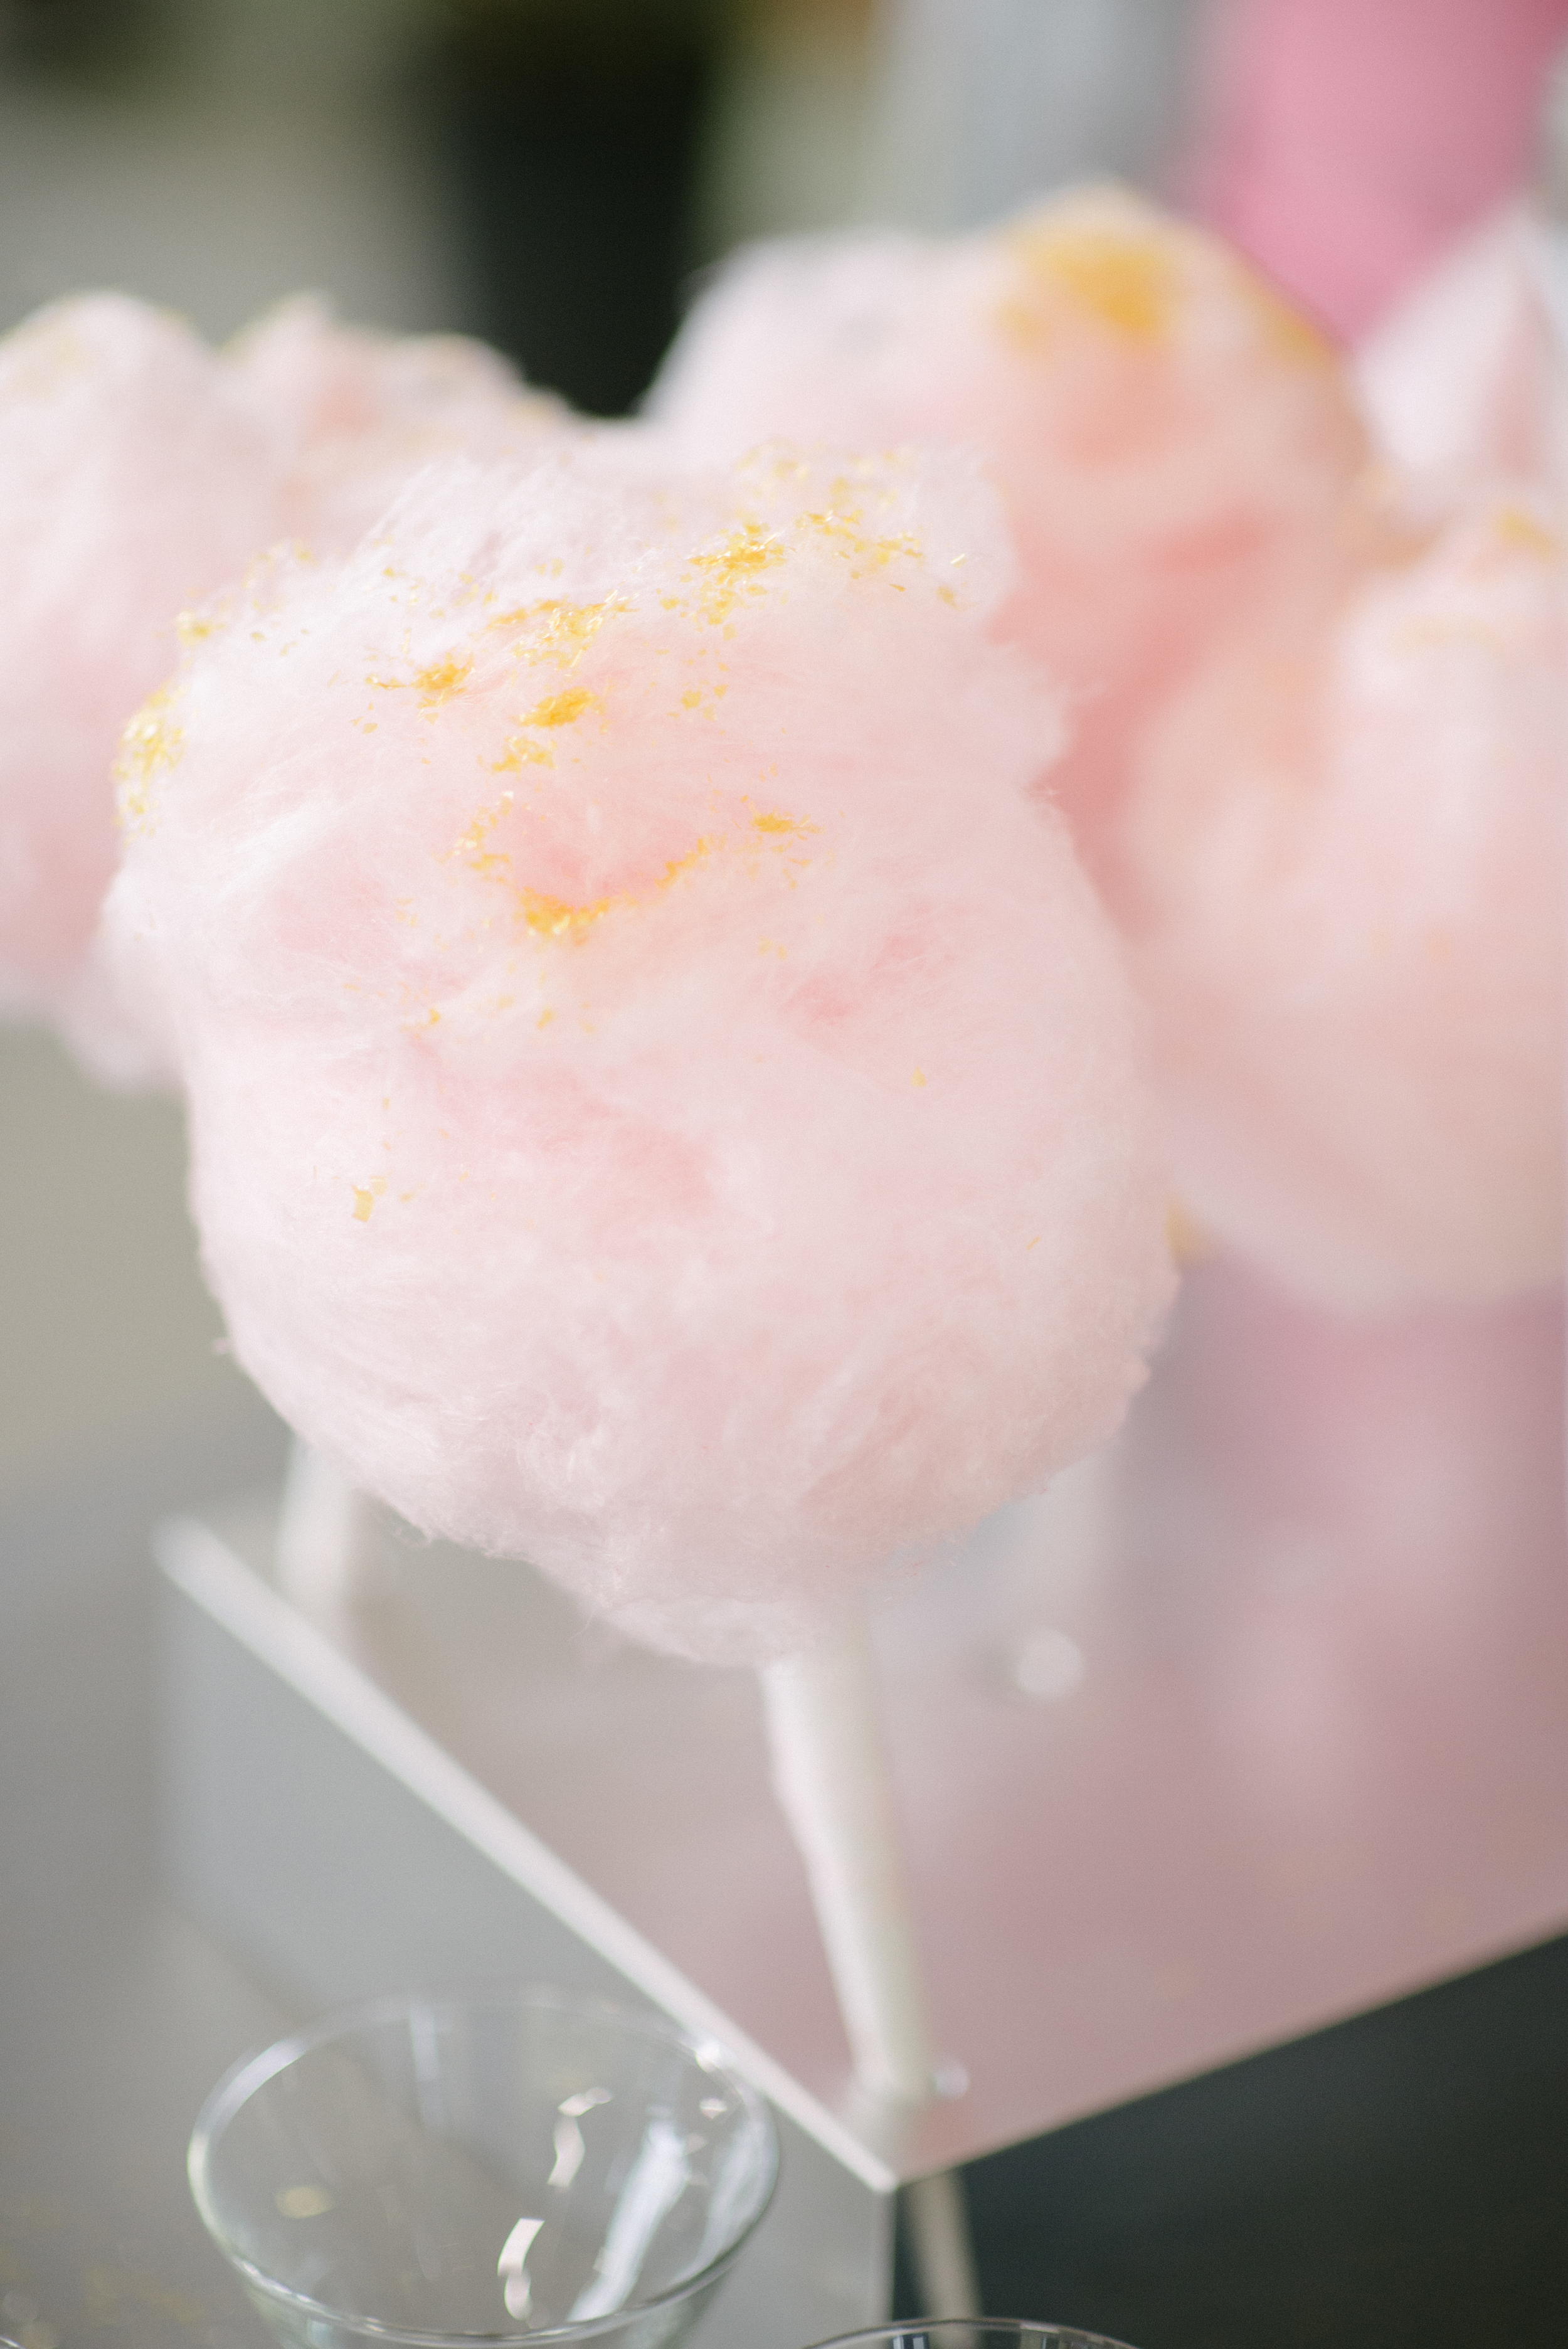 Cotton Candy with edible gold glitter